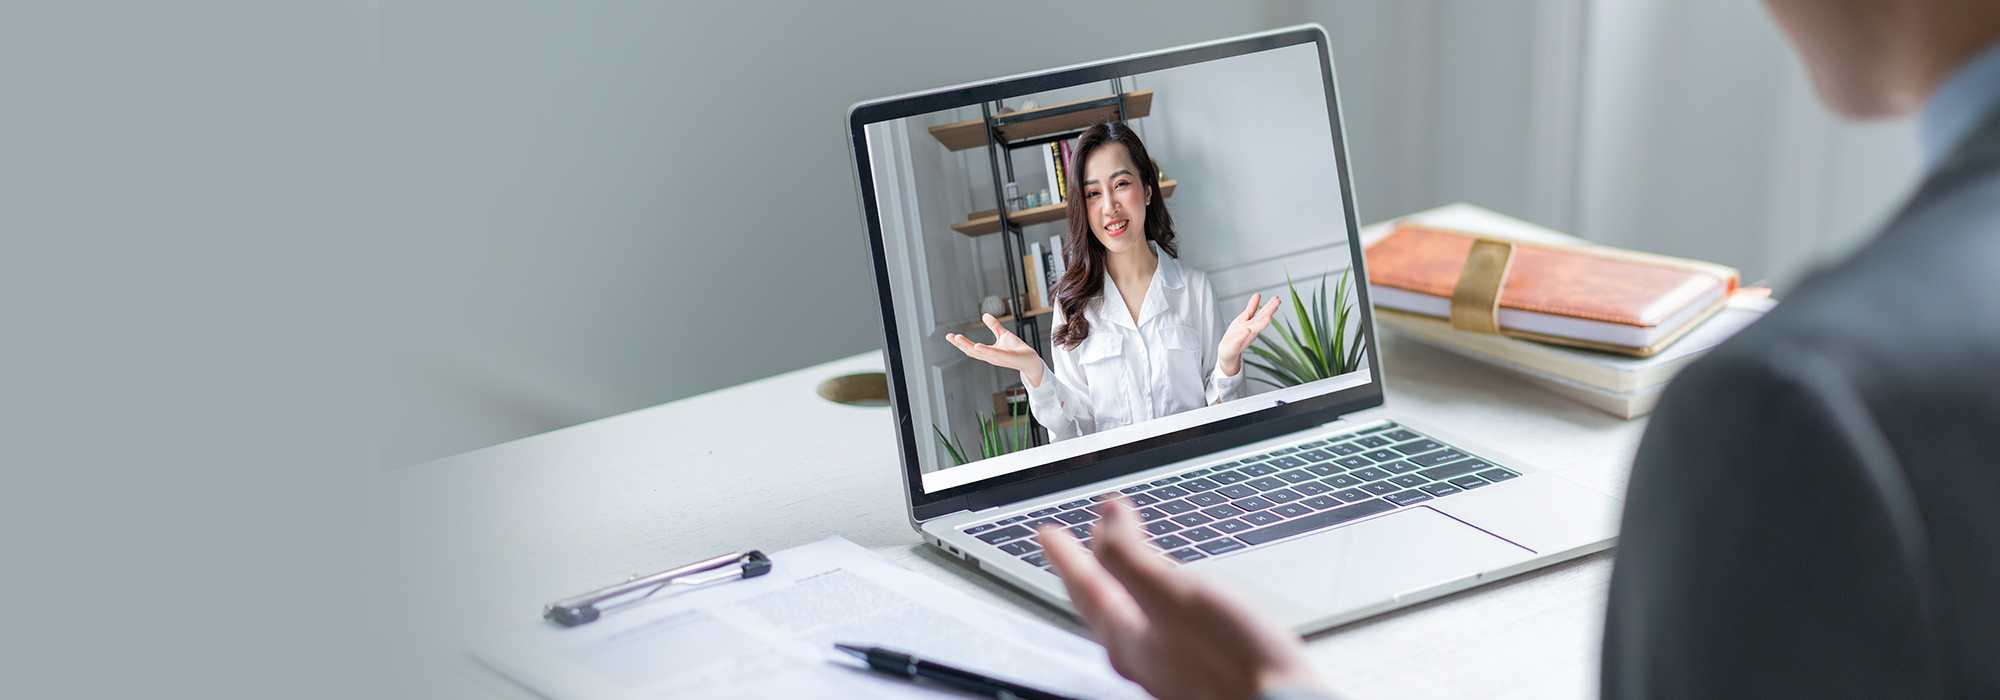 How to Conduct a Remote Interview